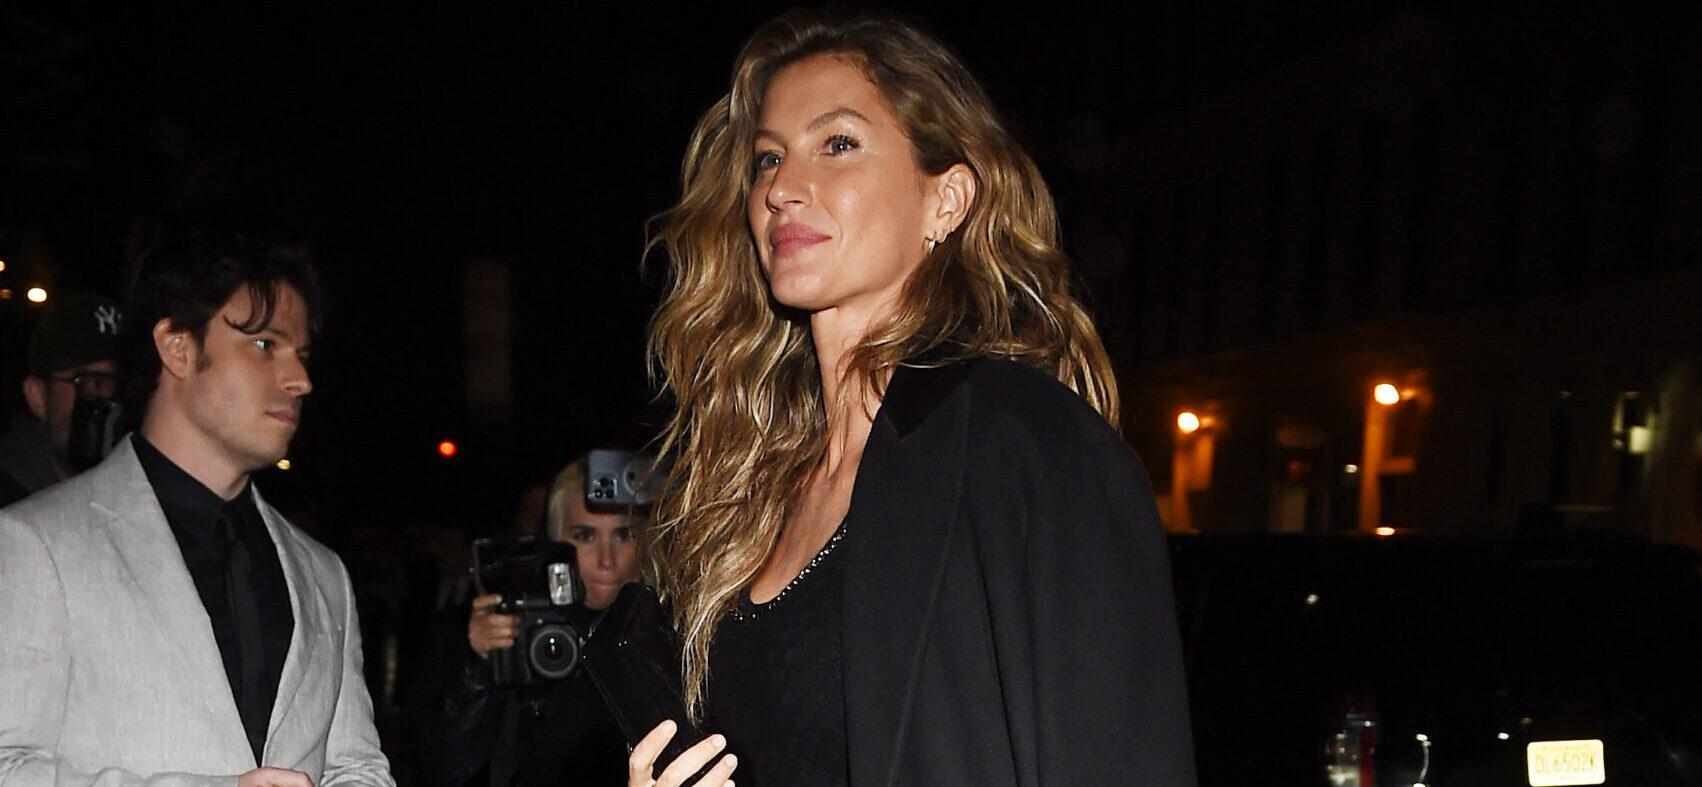 Gisele Bündchen Reportedly Has Issues With Tom Brady’s New Romance!